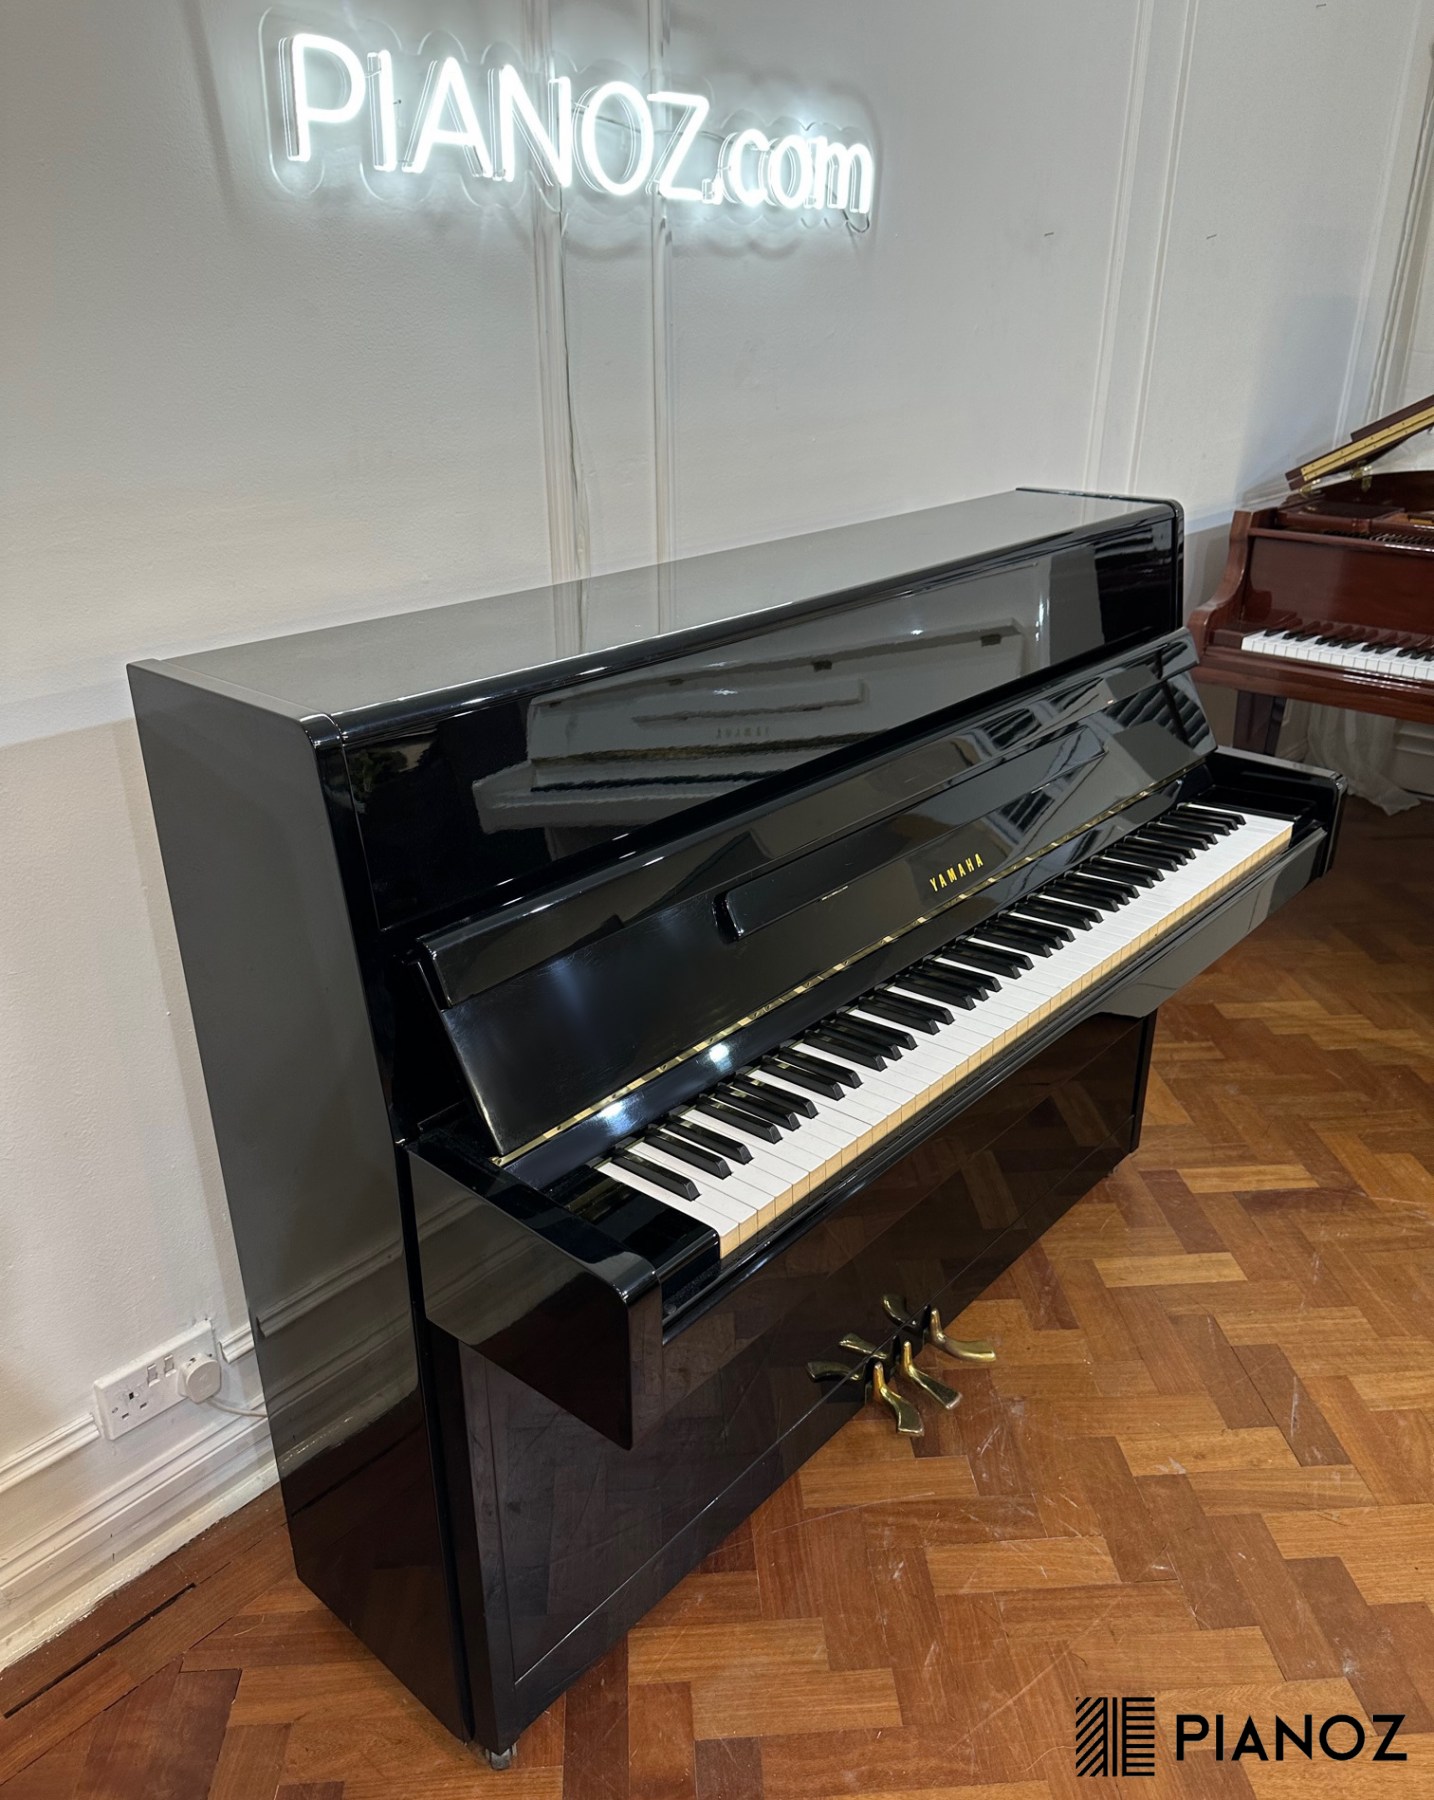 Yamaha M5J Japanese Upright Piano piano for sale in UK